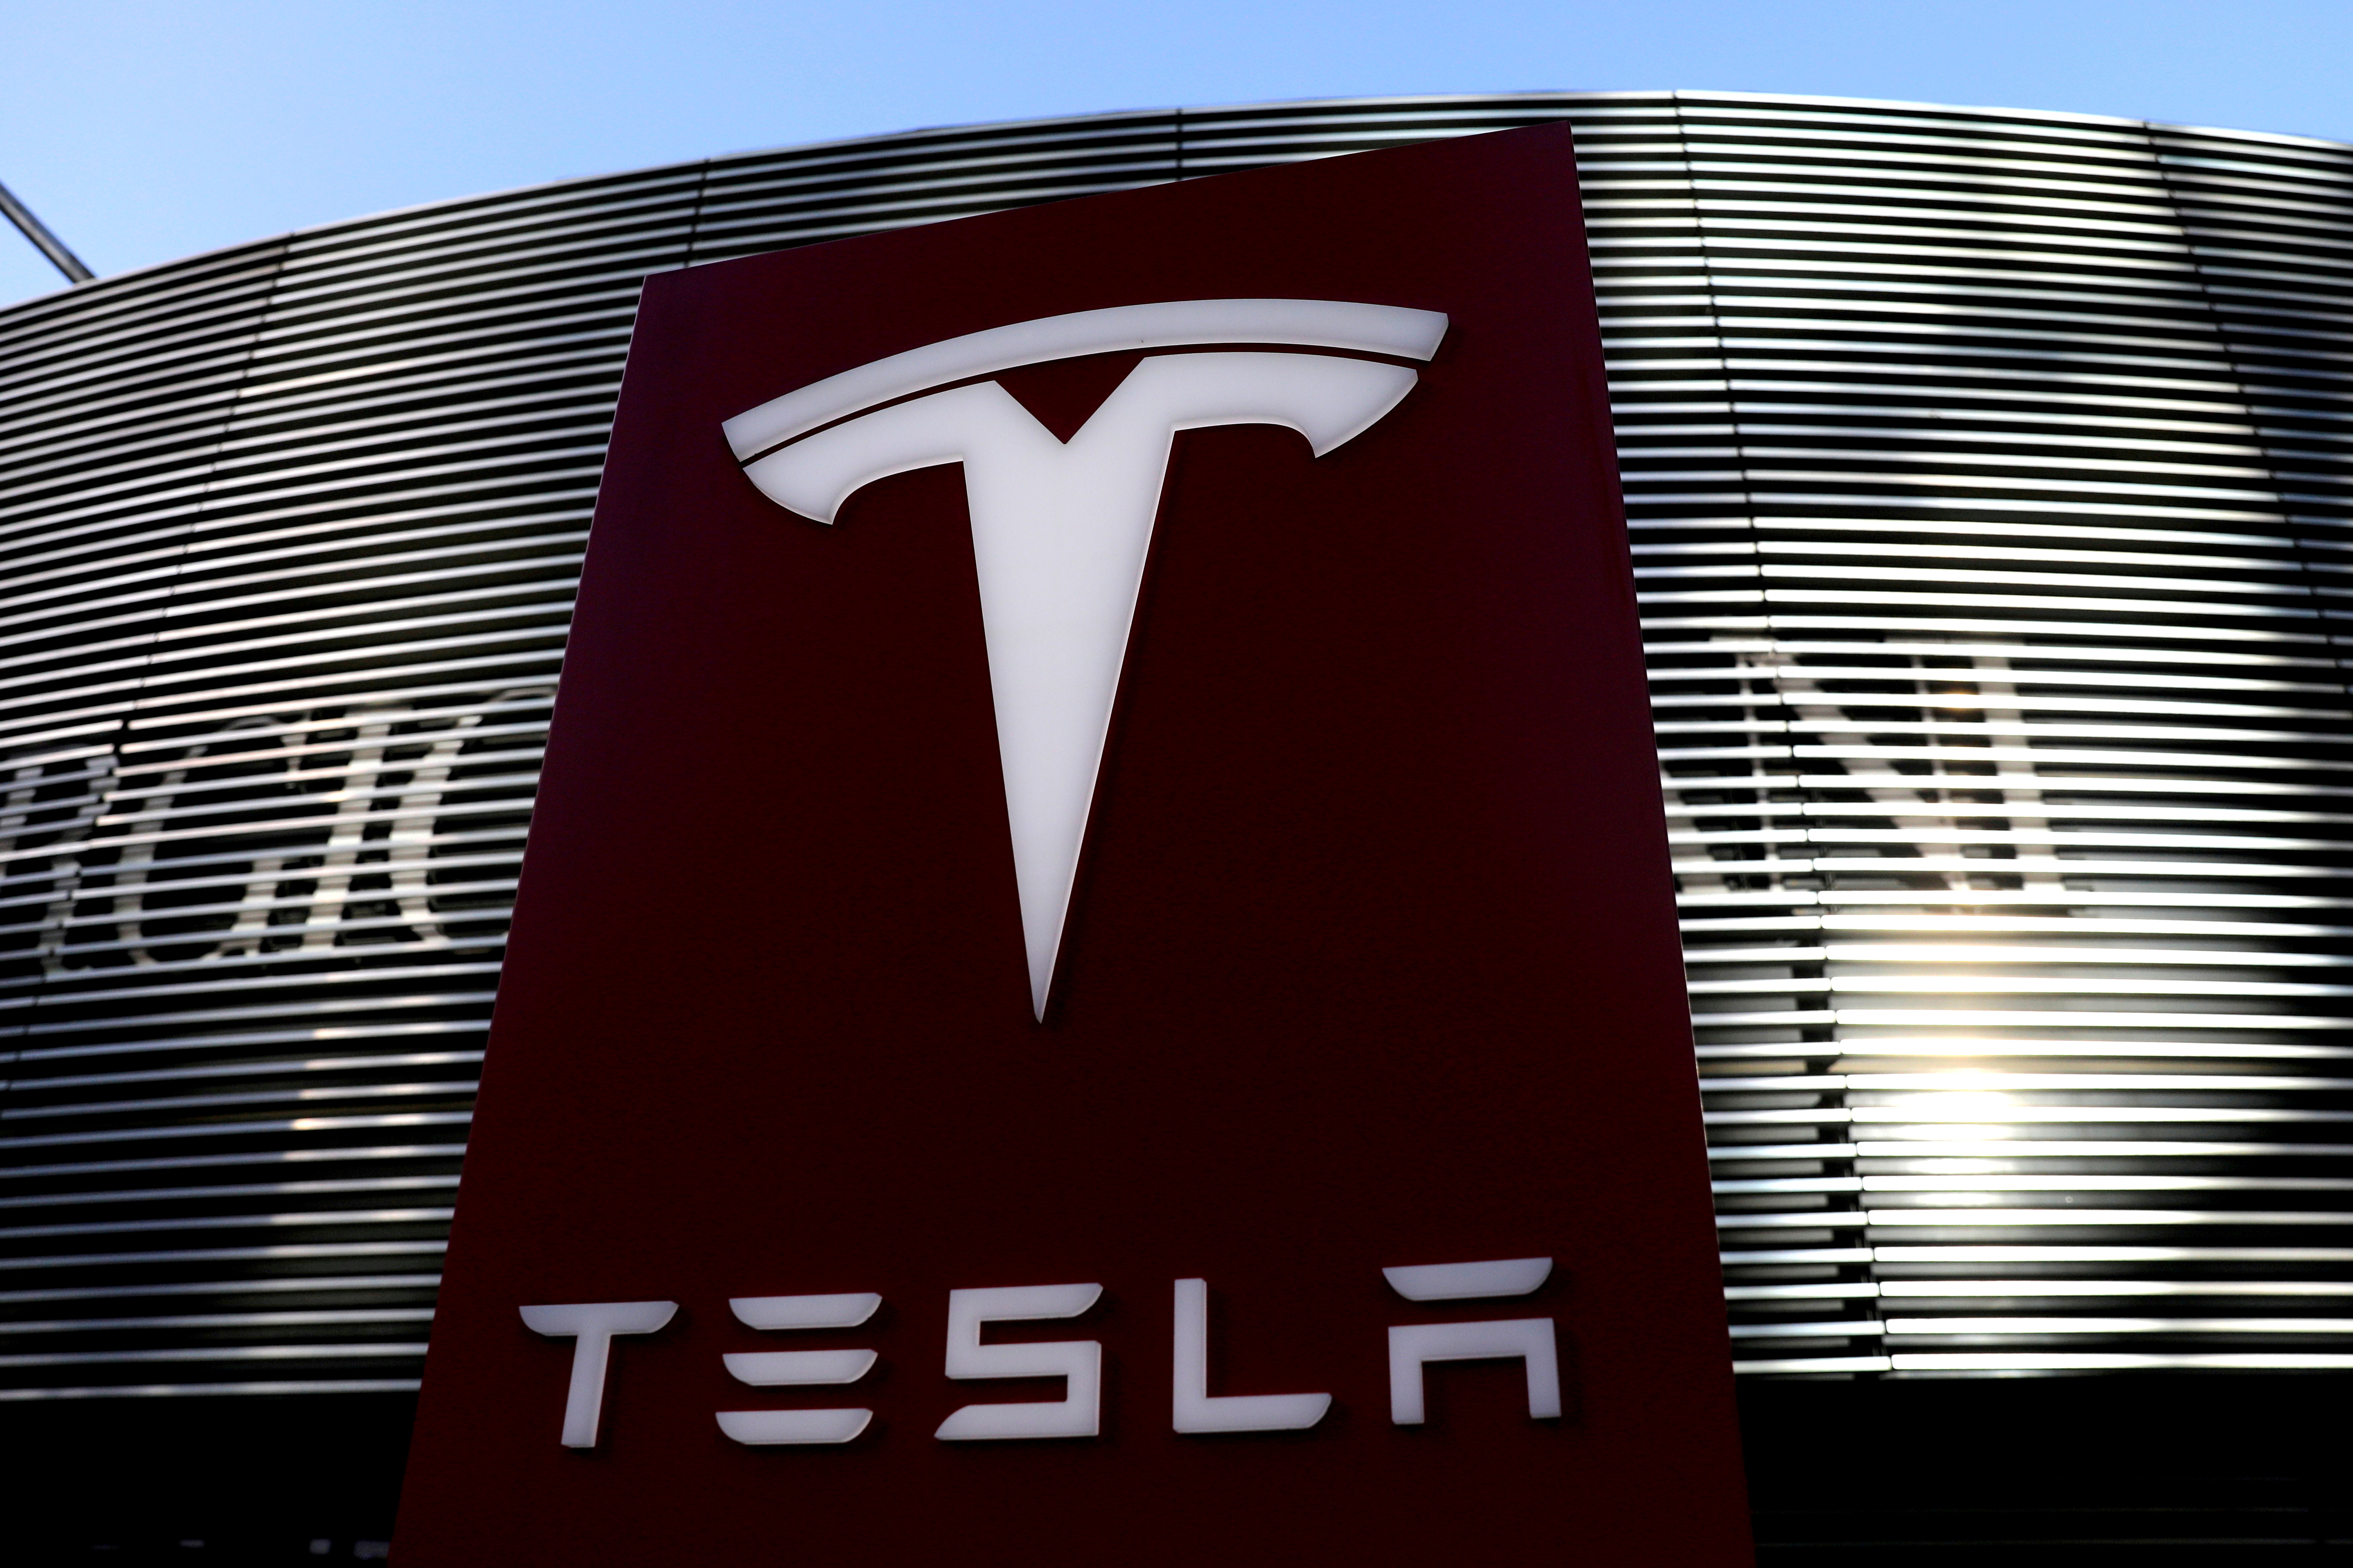 A logo of the electric-vehicle maker Tesla is seen near a shopping complex in Beijing, China January 5, 2021. REUTERS/Tingshu Wang/File Photo